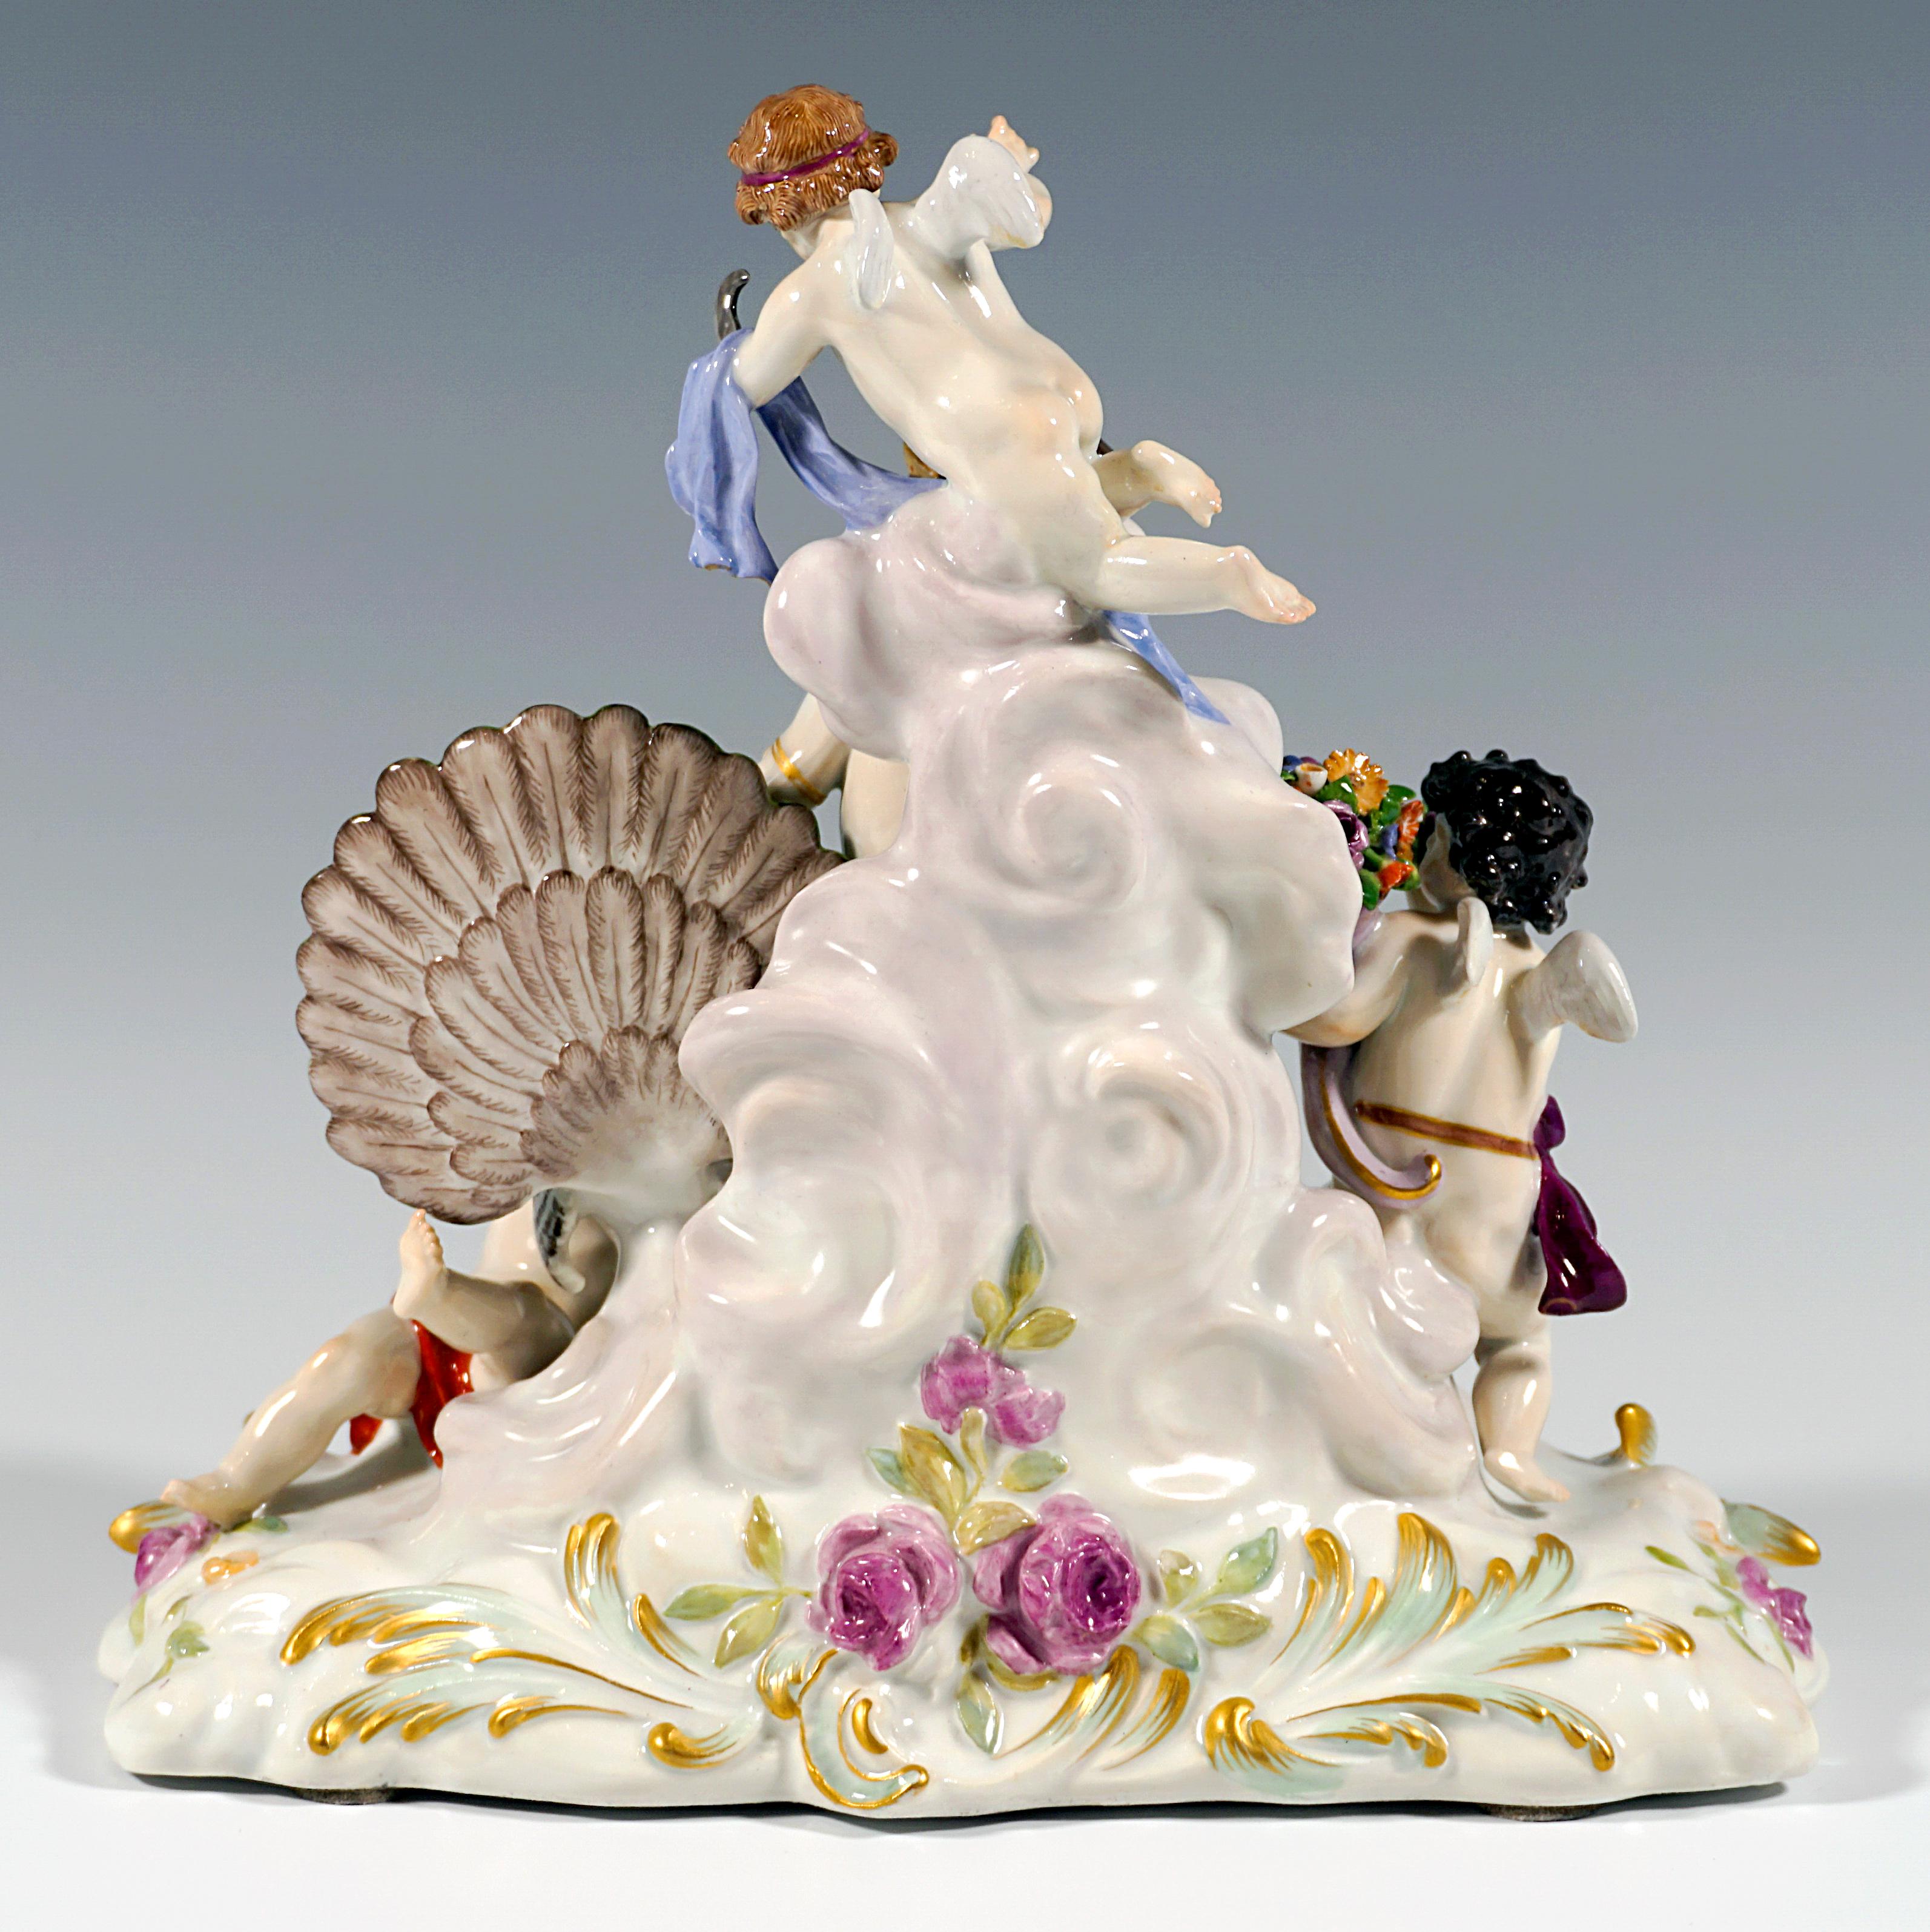 Hand-Crafted Meissen Art Nouveau Group 'The Air' by Paul Helmig, Germany Around 1900 For Sale